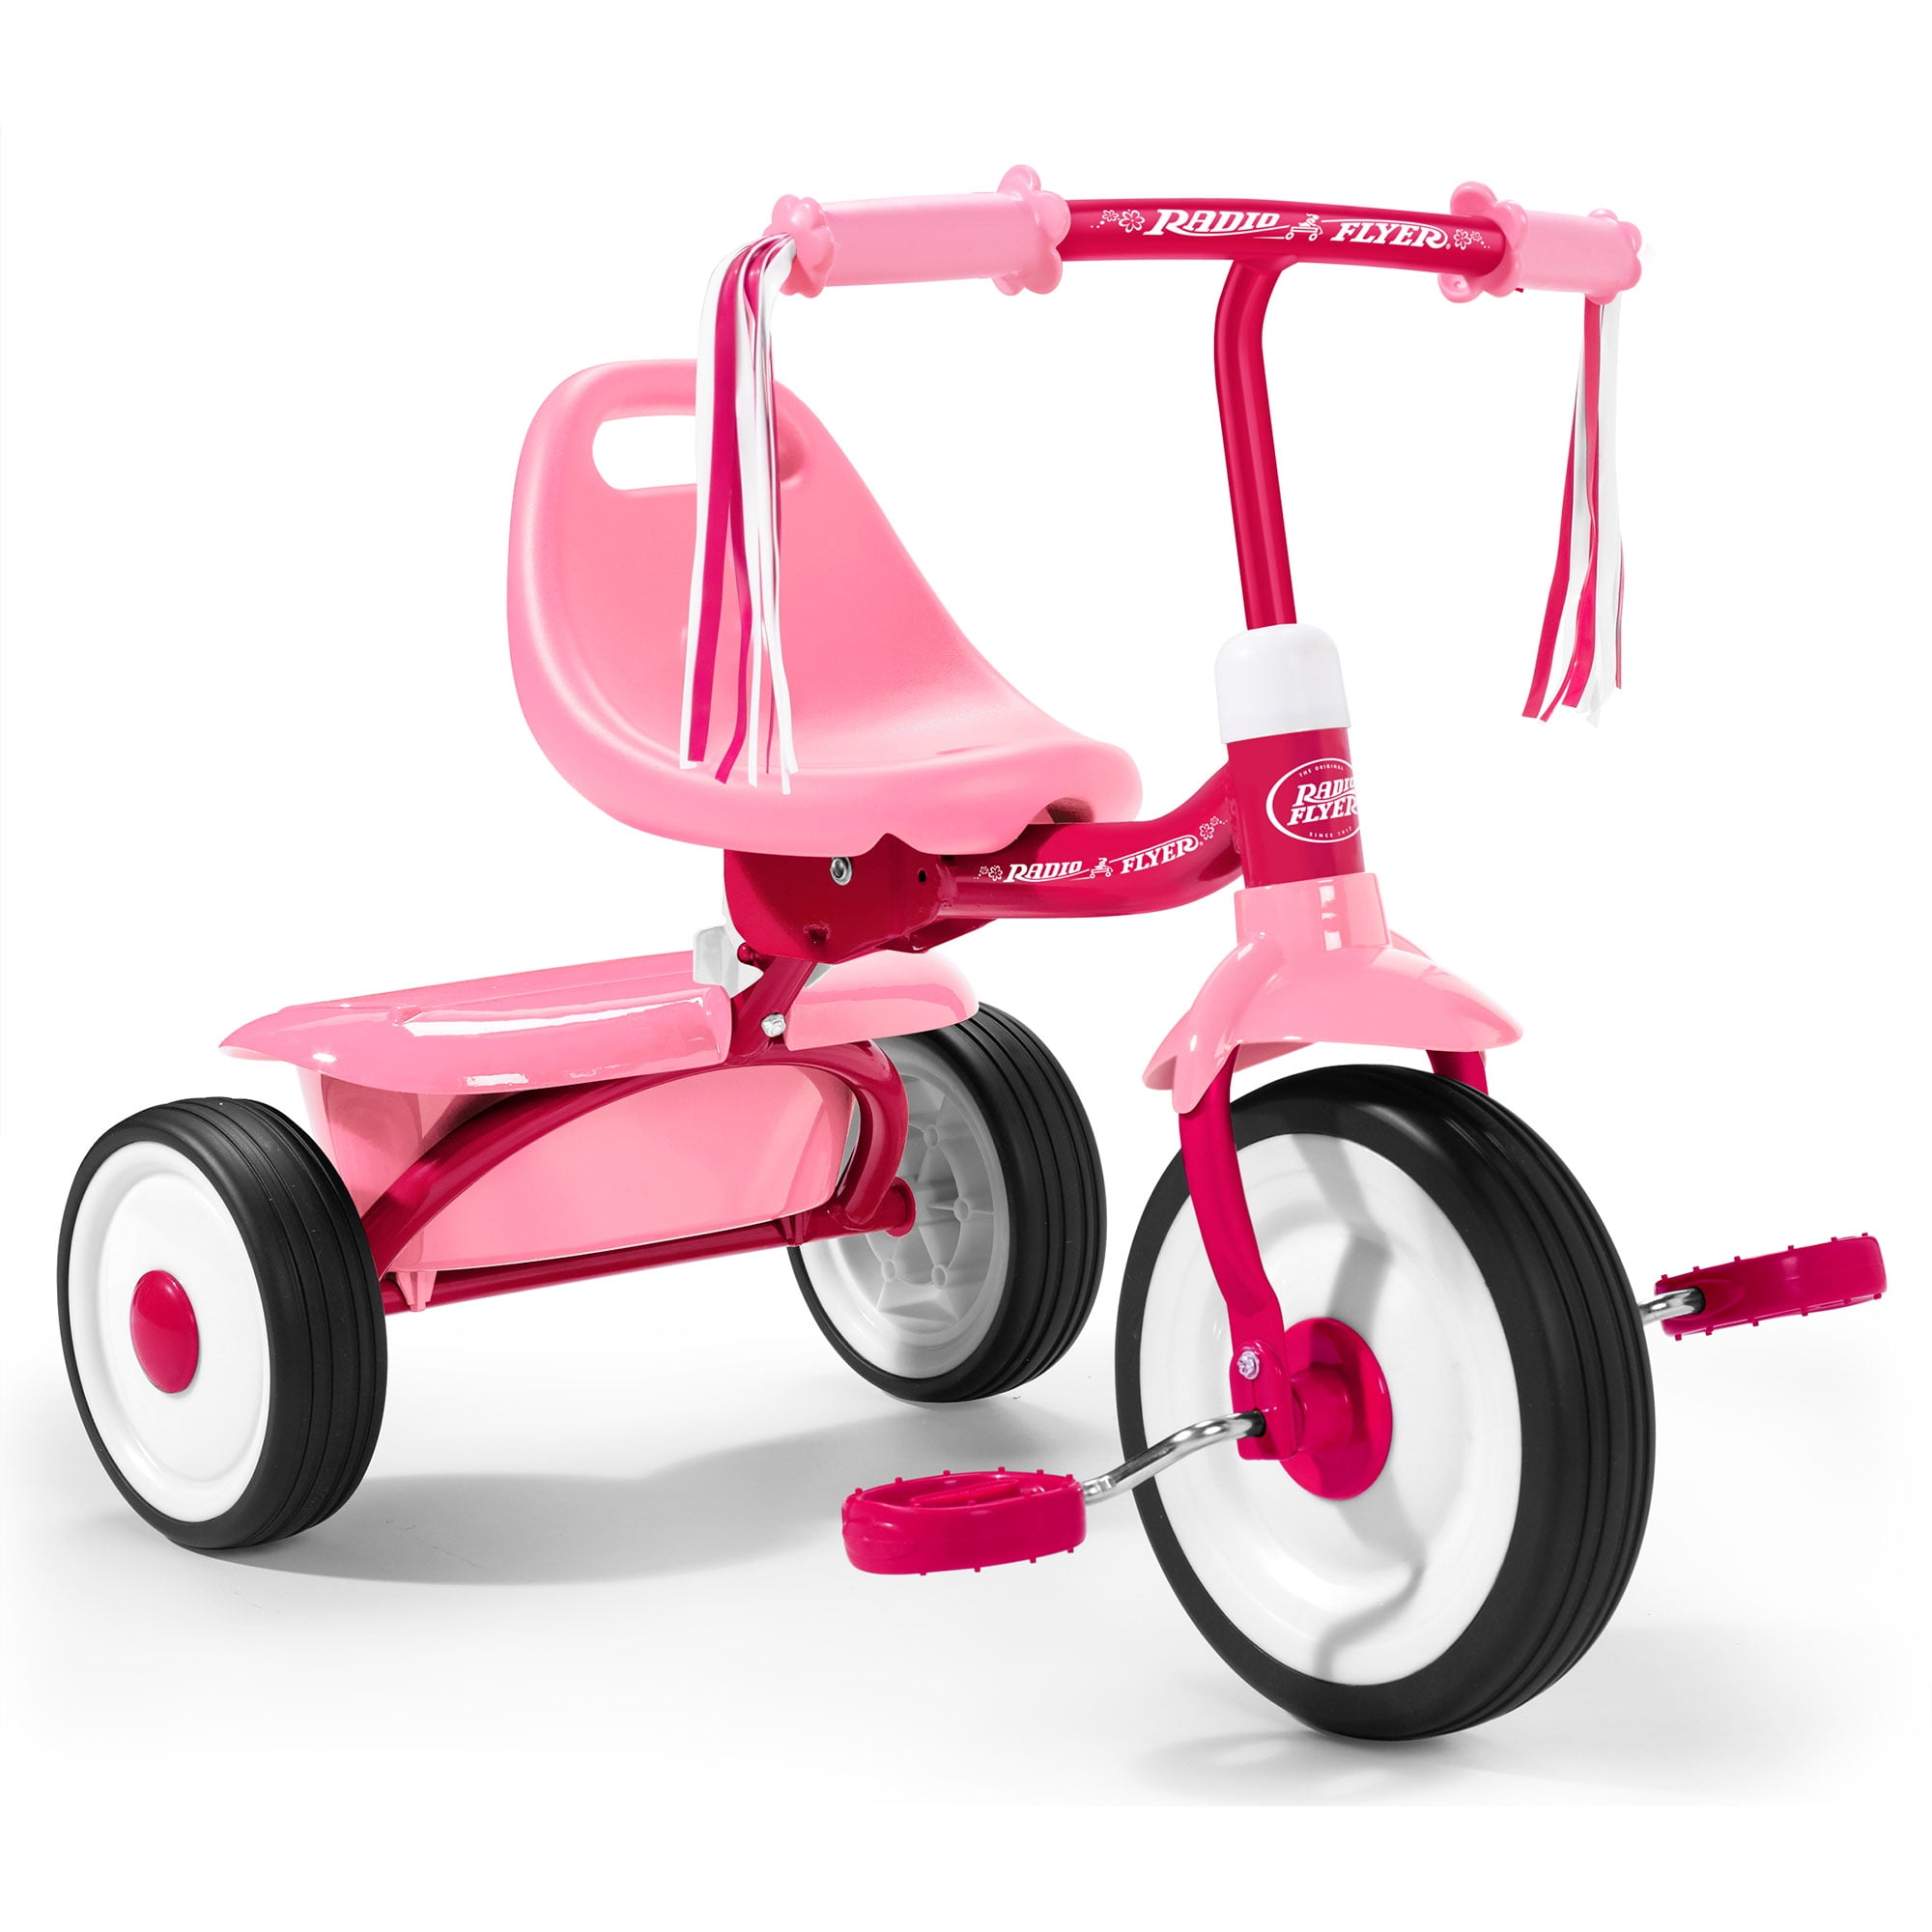 Junior Flyer Trike Outdoor Toy for Kids Ages 2-5